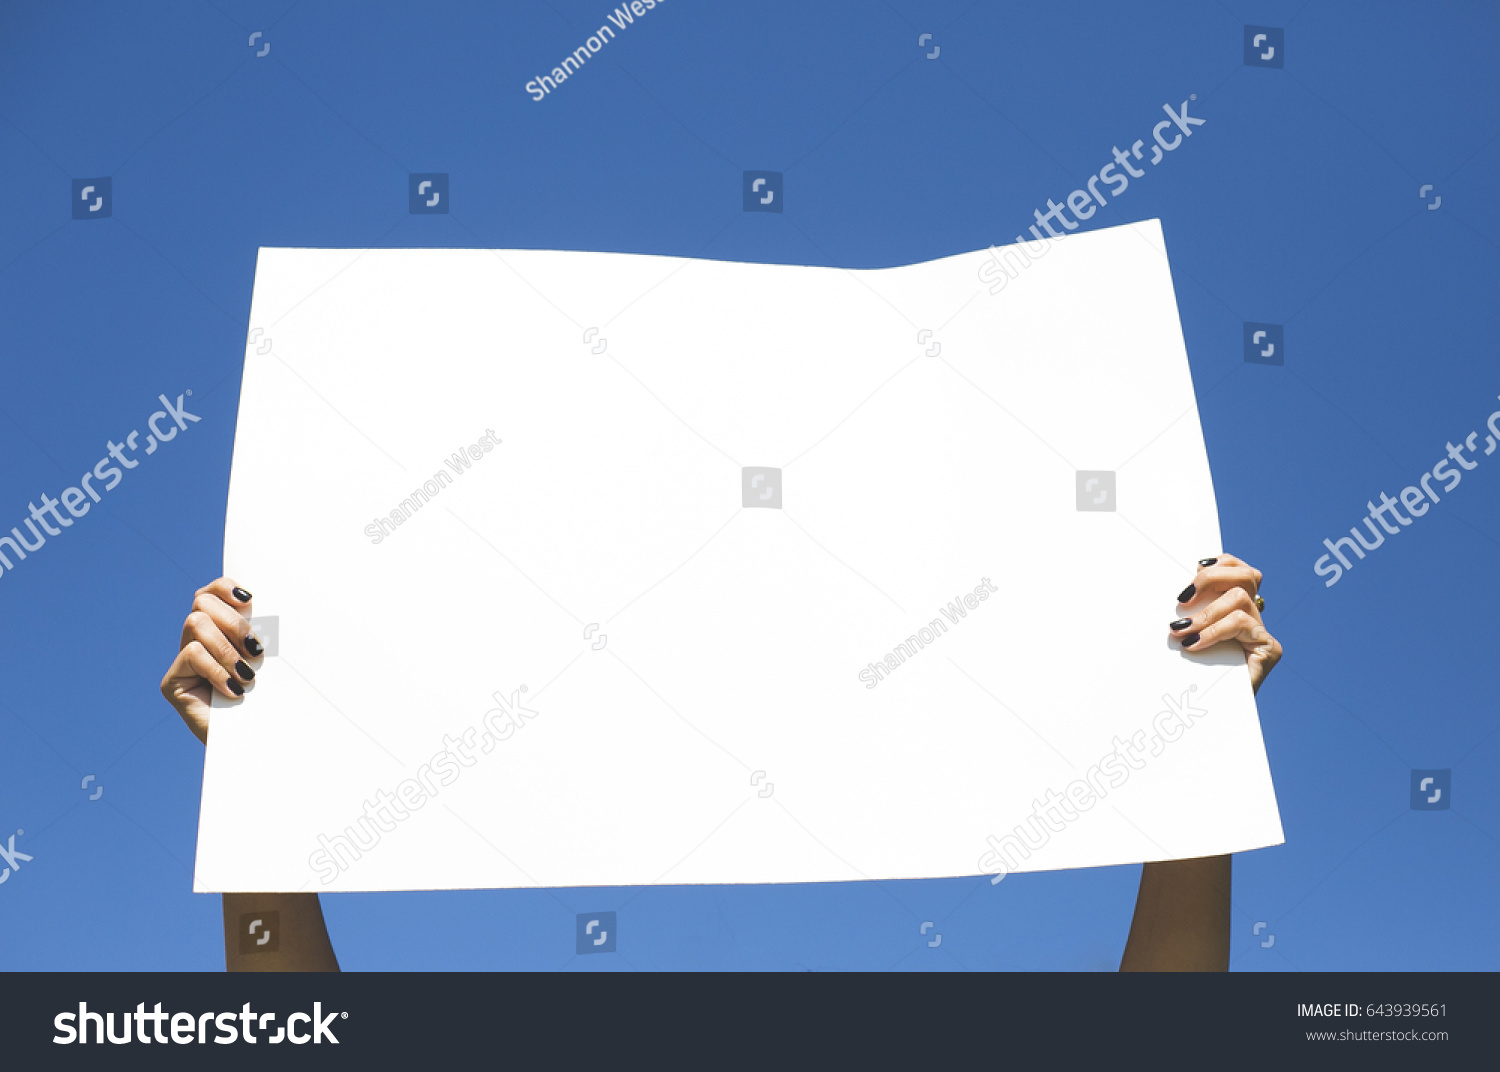 stock-photo-woman-holding-blank-protest-sign-643939561.jpg